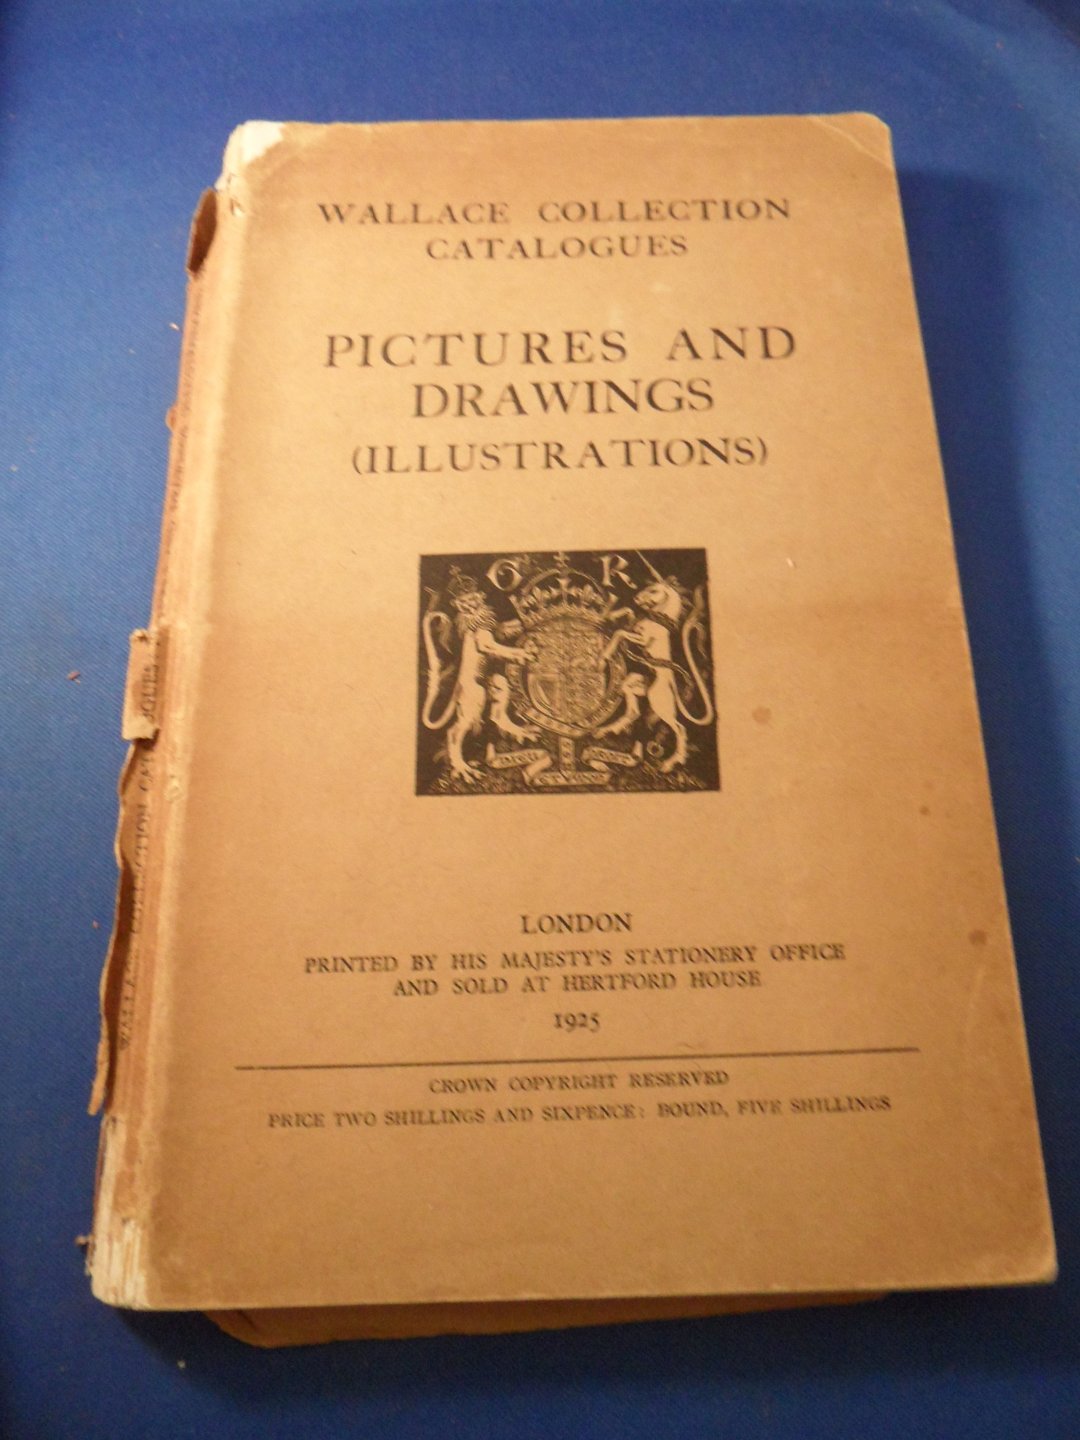  - Wallace Collection Catalogue. Pictures and Drawings (illustrations)